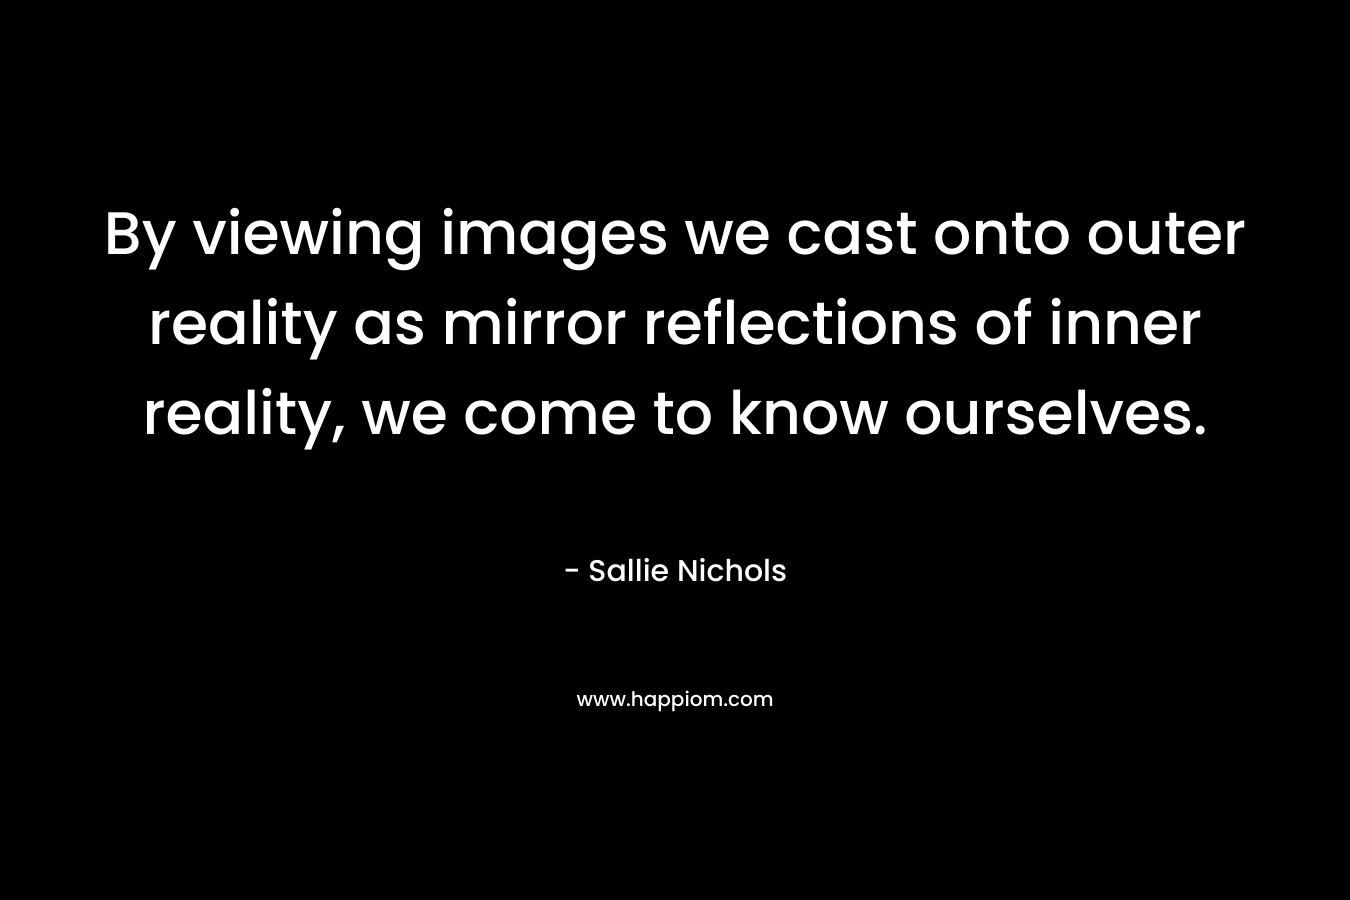 By viewing images we cast onto outer reality as mirror reflections of inner reality, we come to know ourselves.